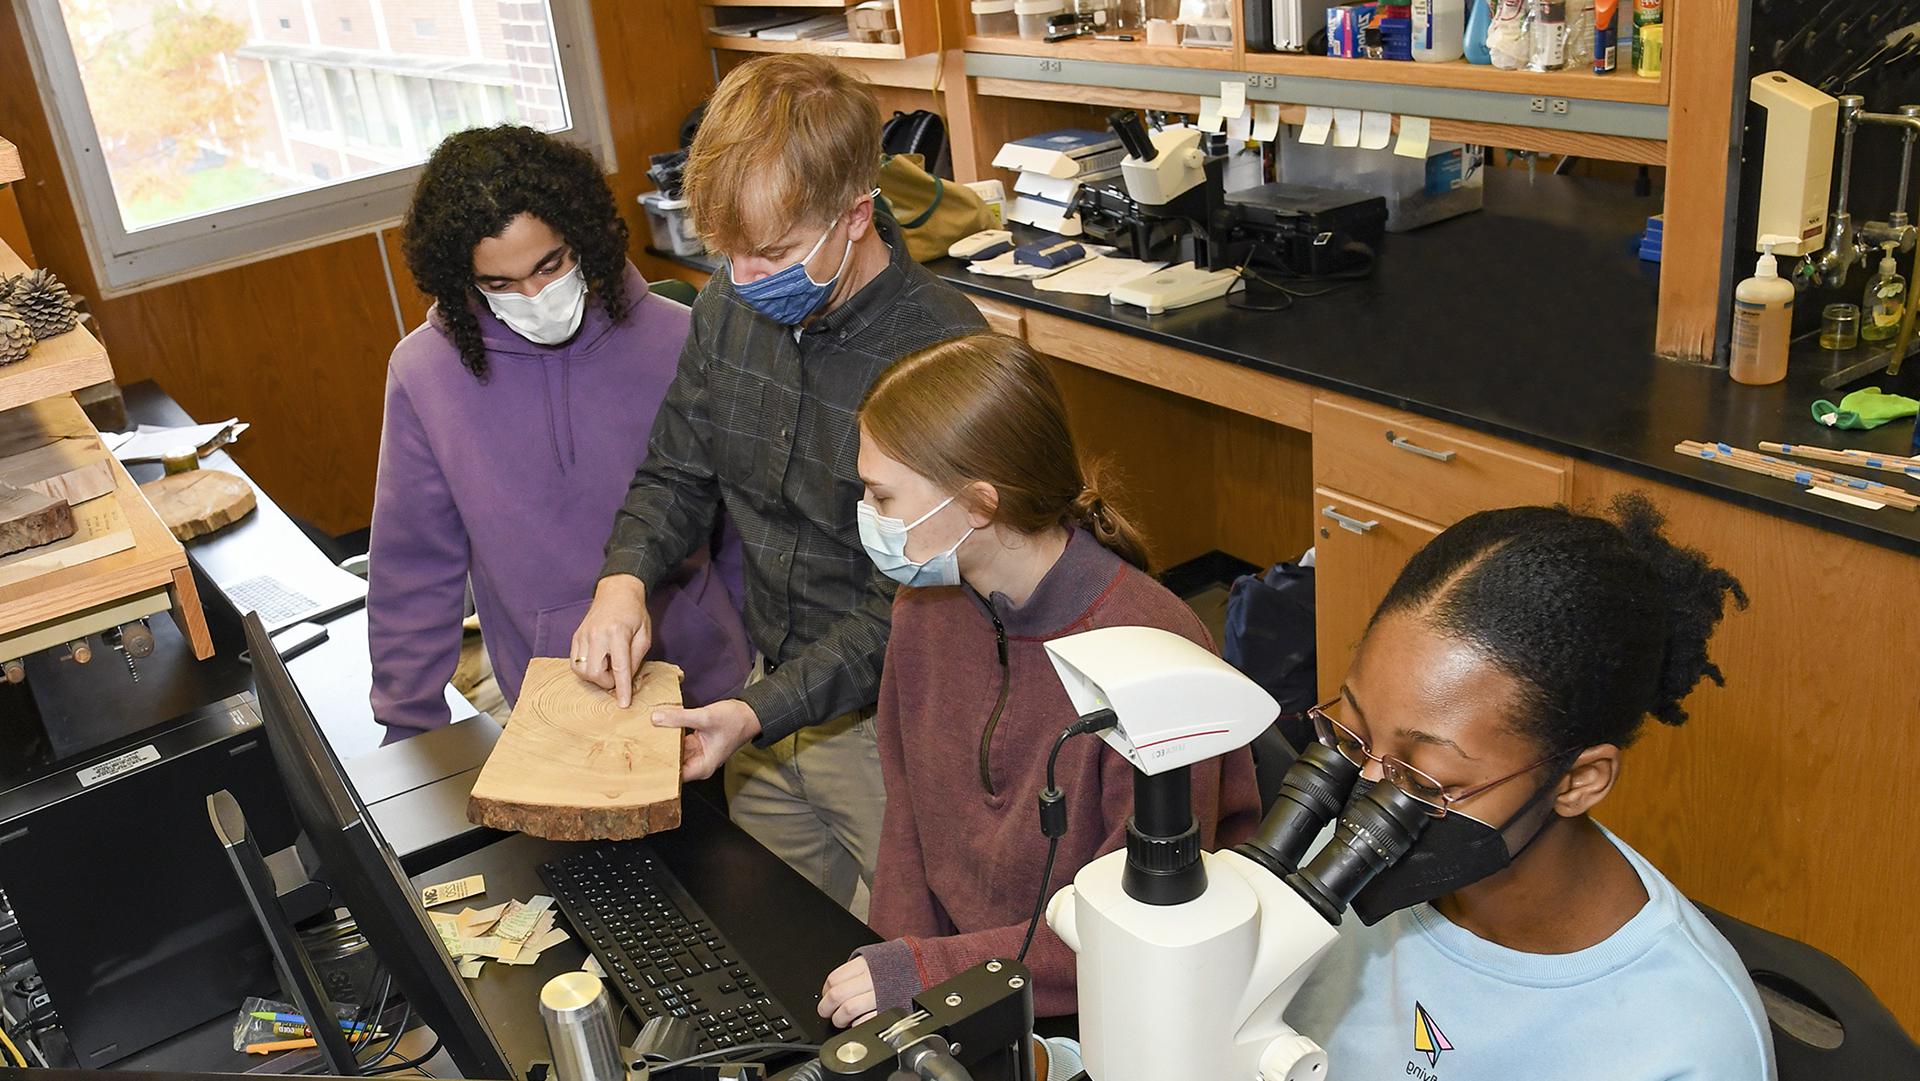 Professor Daniel Druckenbrod in the lab with students